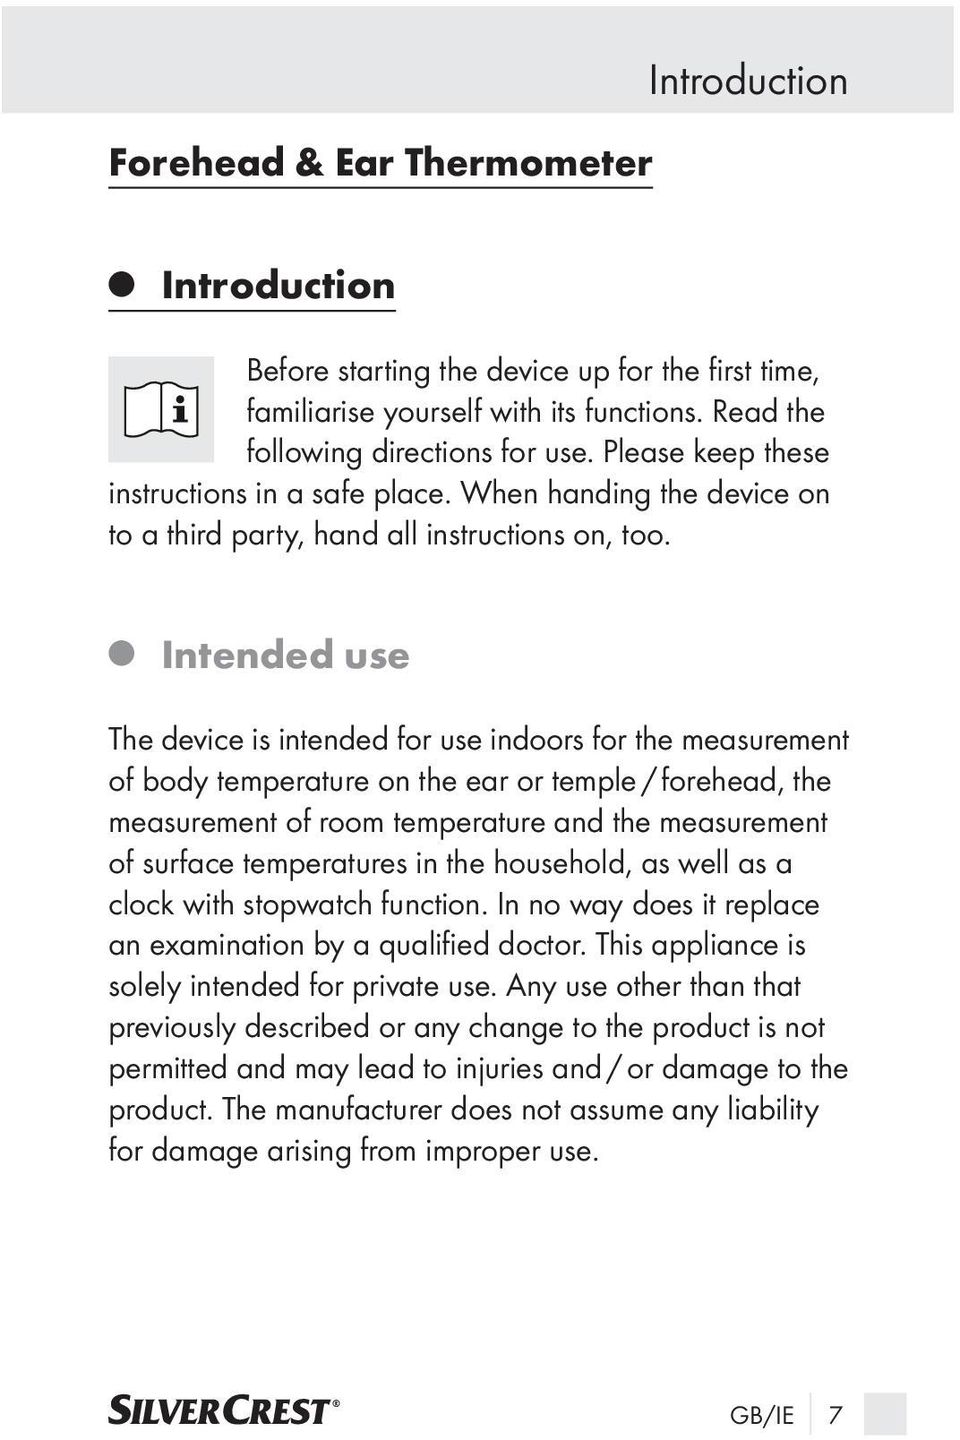 Intended use The device is intended for use indoors for the measurement of body temperature on the ear or temple / forehead, the measurement of room temperature and the measurement of surface